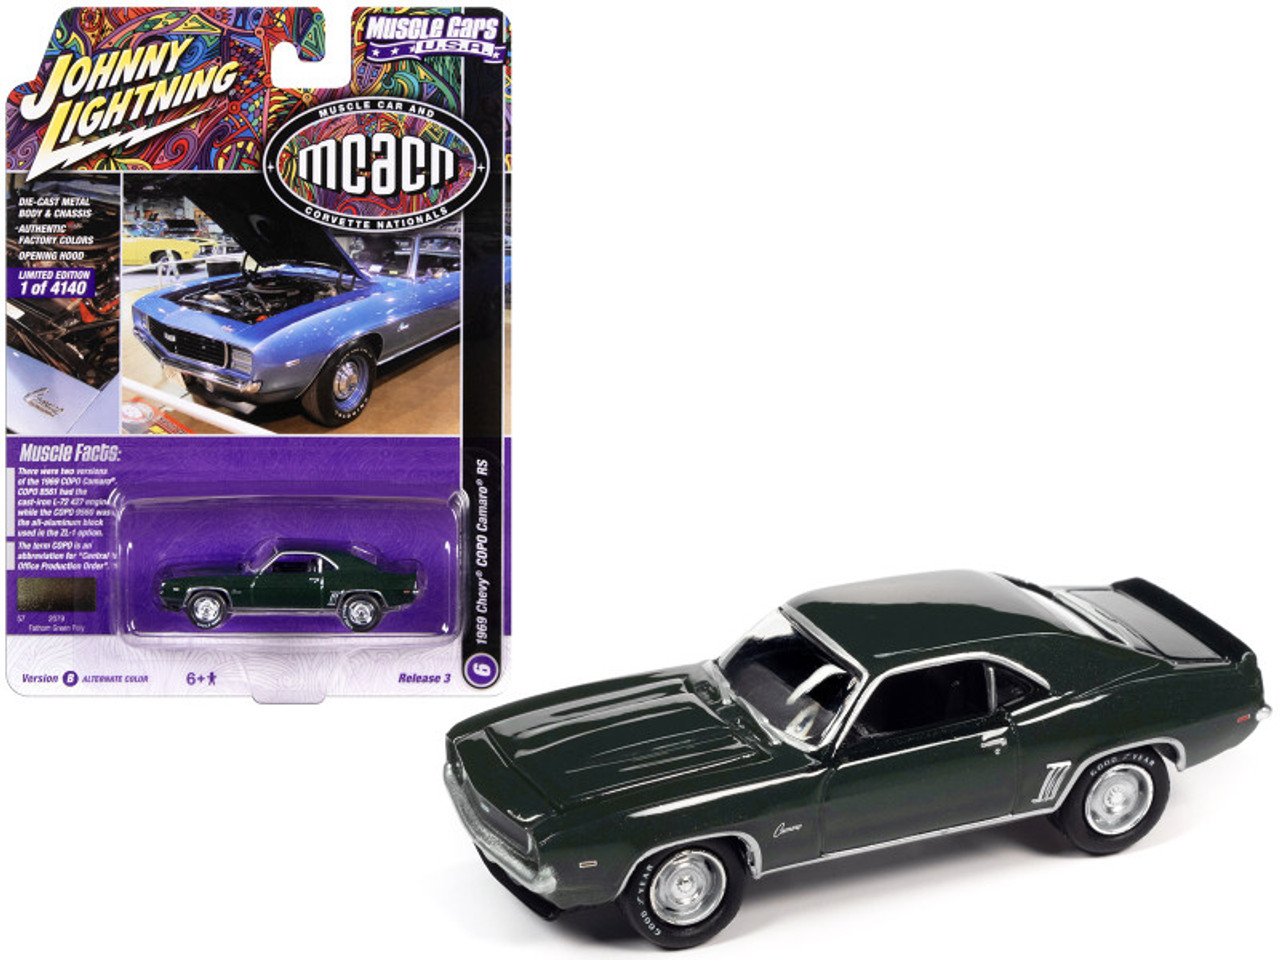 1969 Chevrolet COPO Camaro RS Fathom Green Metallic "MCACN (Muscle Car and Corvette Nationals)" Limited Edition to 4140 pieces Worldwide "Muscle Cars USA" Series 1/64 Diecast Model Car by Johnny Lightning